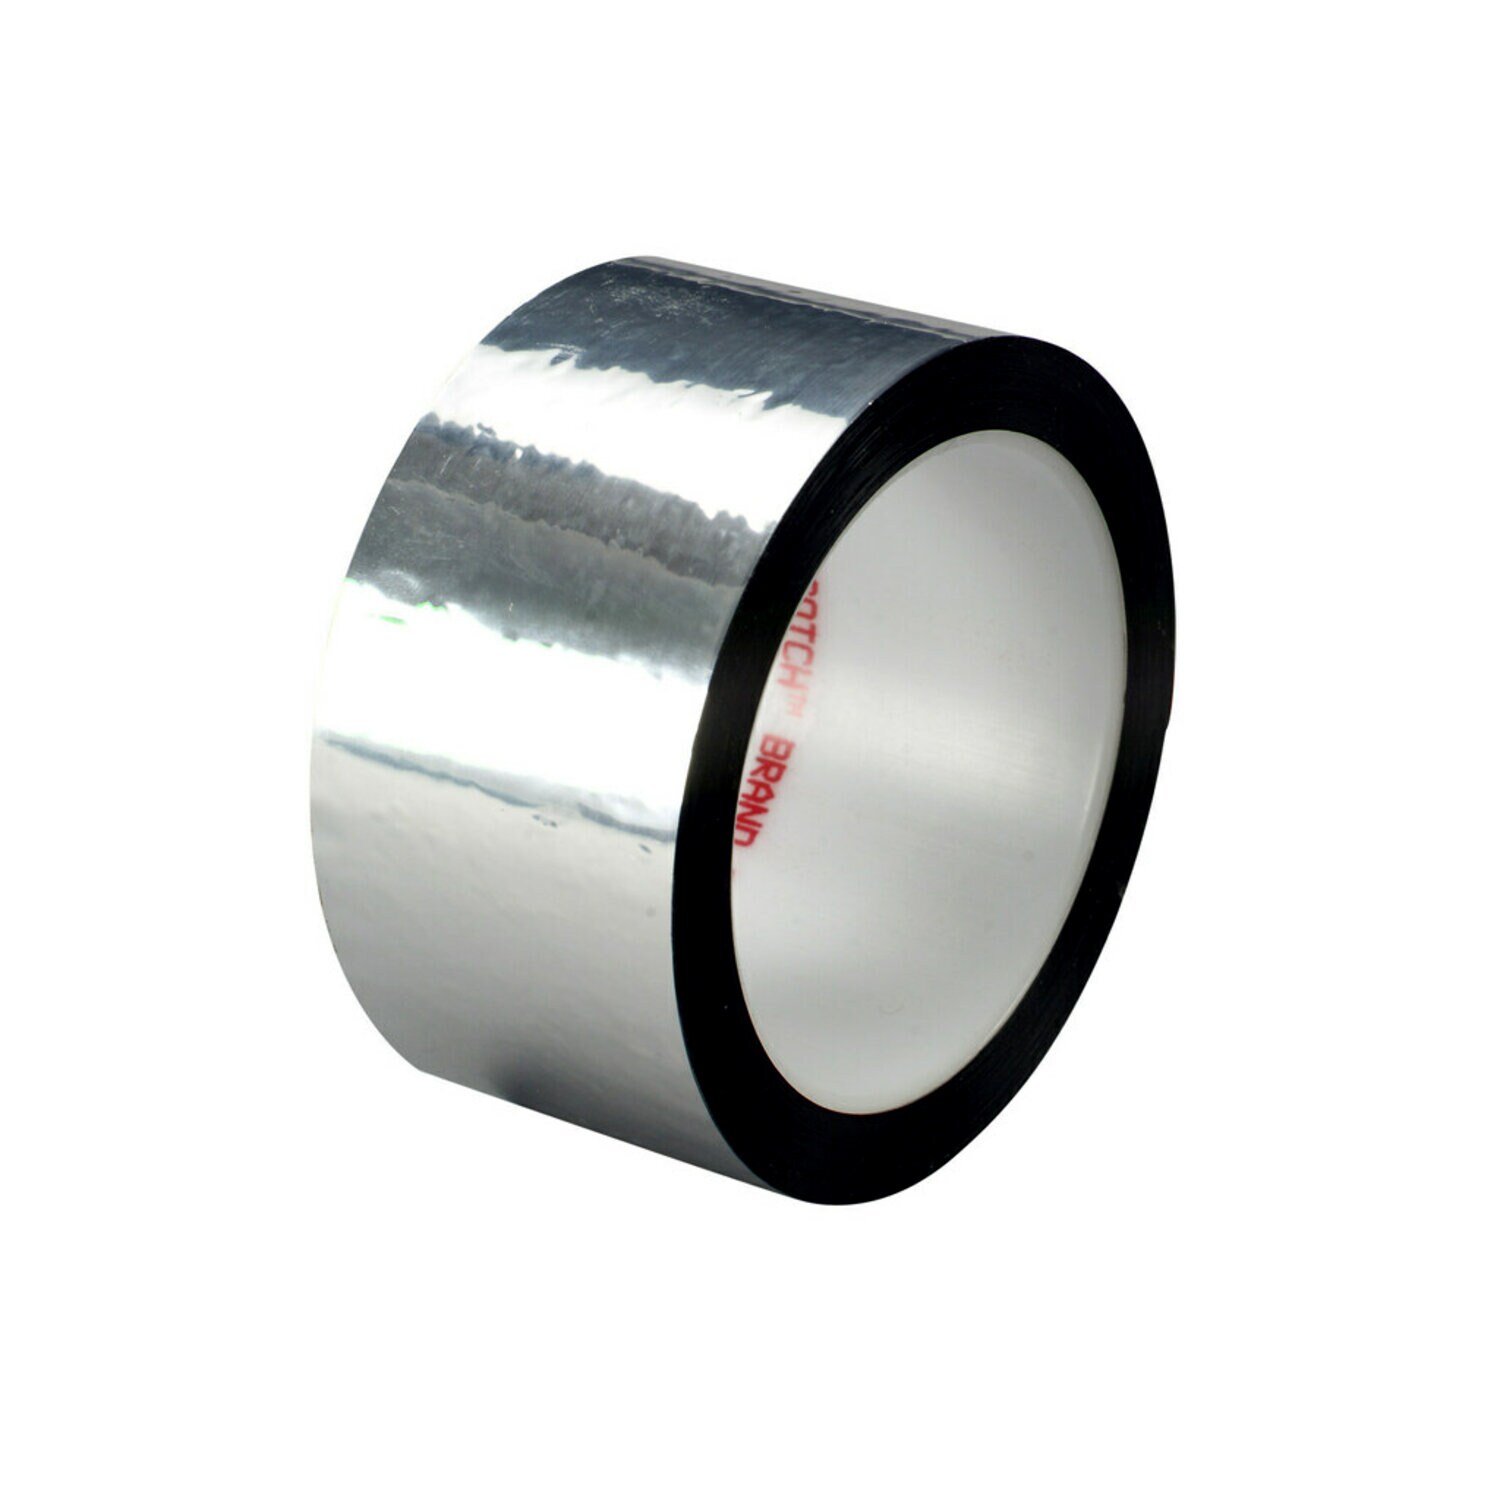 3M General Use Duct Tape 2929, Silver, 1.88 in x 50 yd, 5.5 mil,  Individually Wrapped Conveniently Packaged